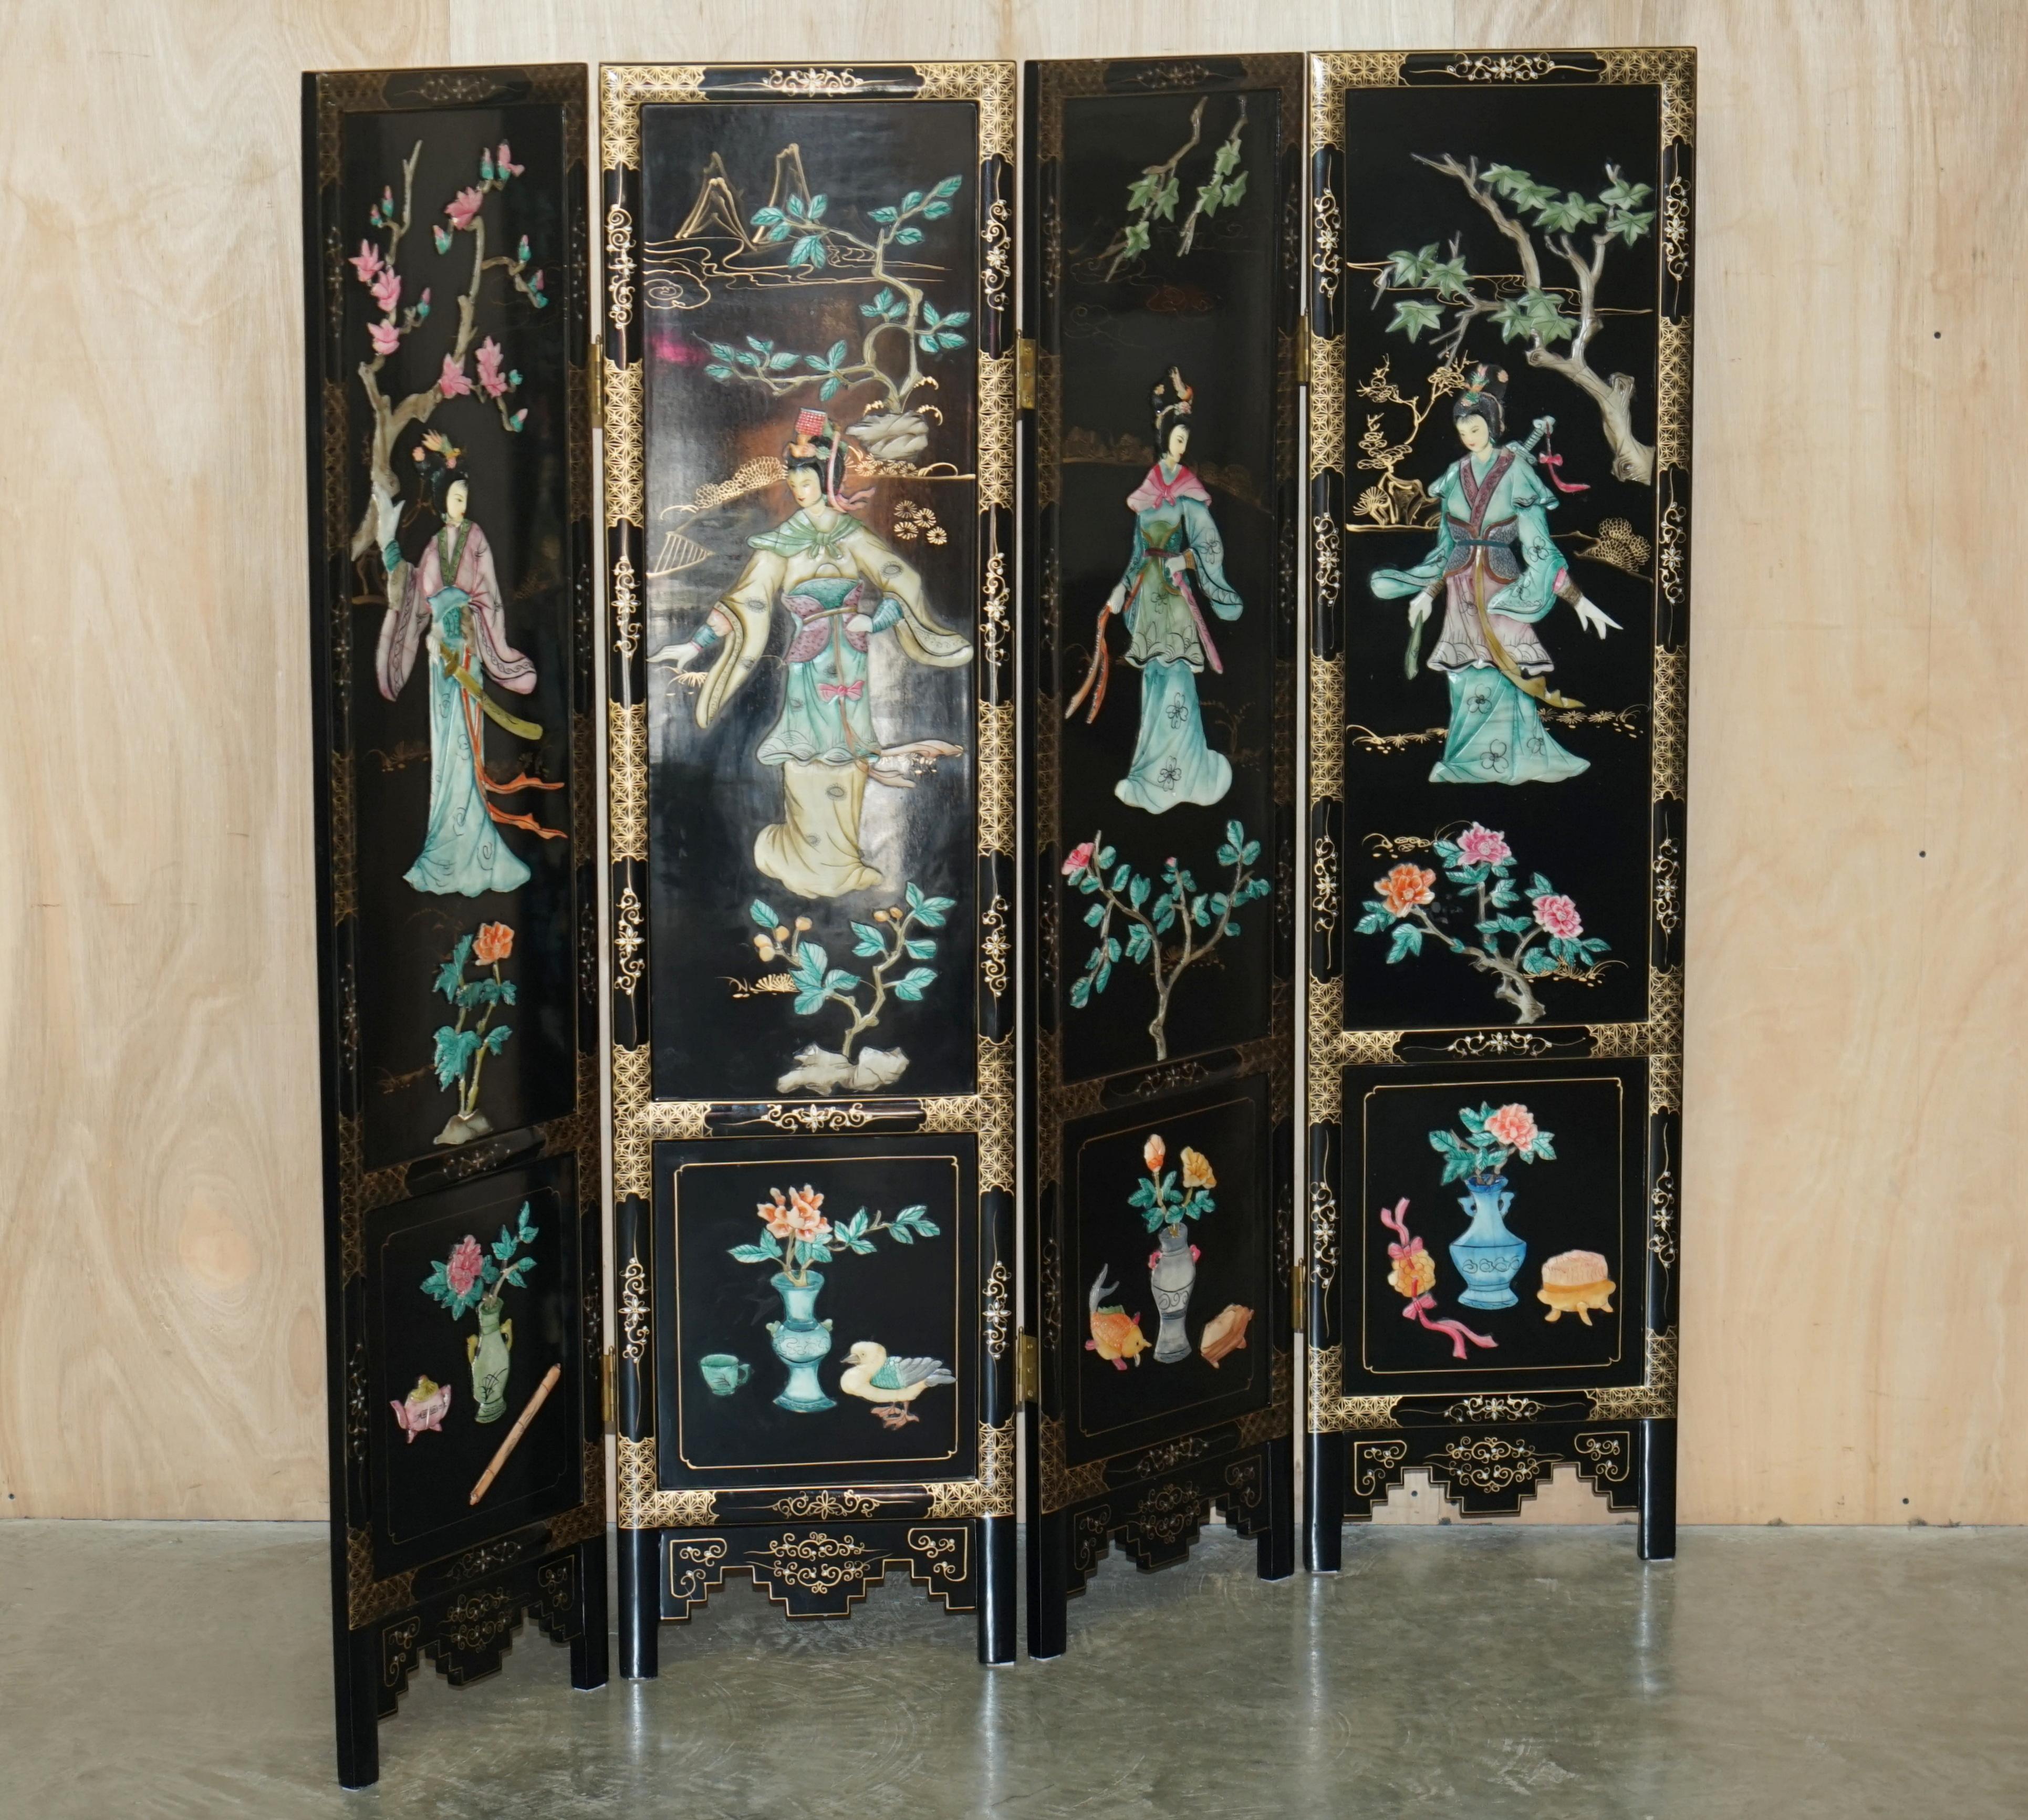 Royal House Antiques

Royal House Antiques is delighted to offer for sale this extremely well made and highly collectable Chinese Export circa 1920’s Soapstone room divider folding screen depicting Geisha Girls 

Please note the delivery fee listed